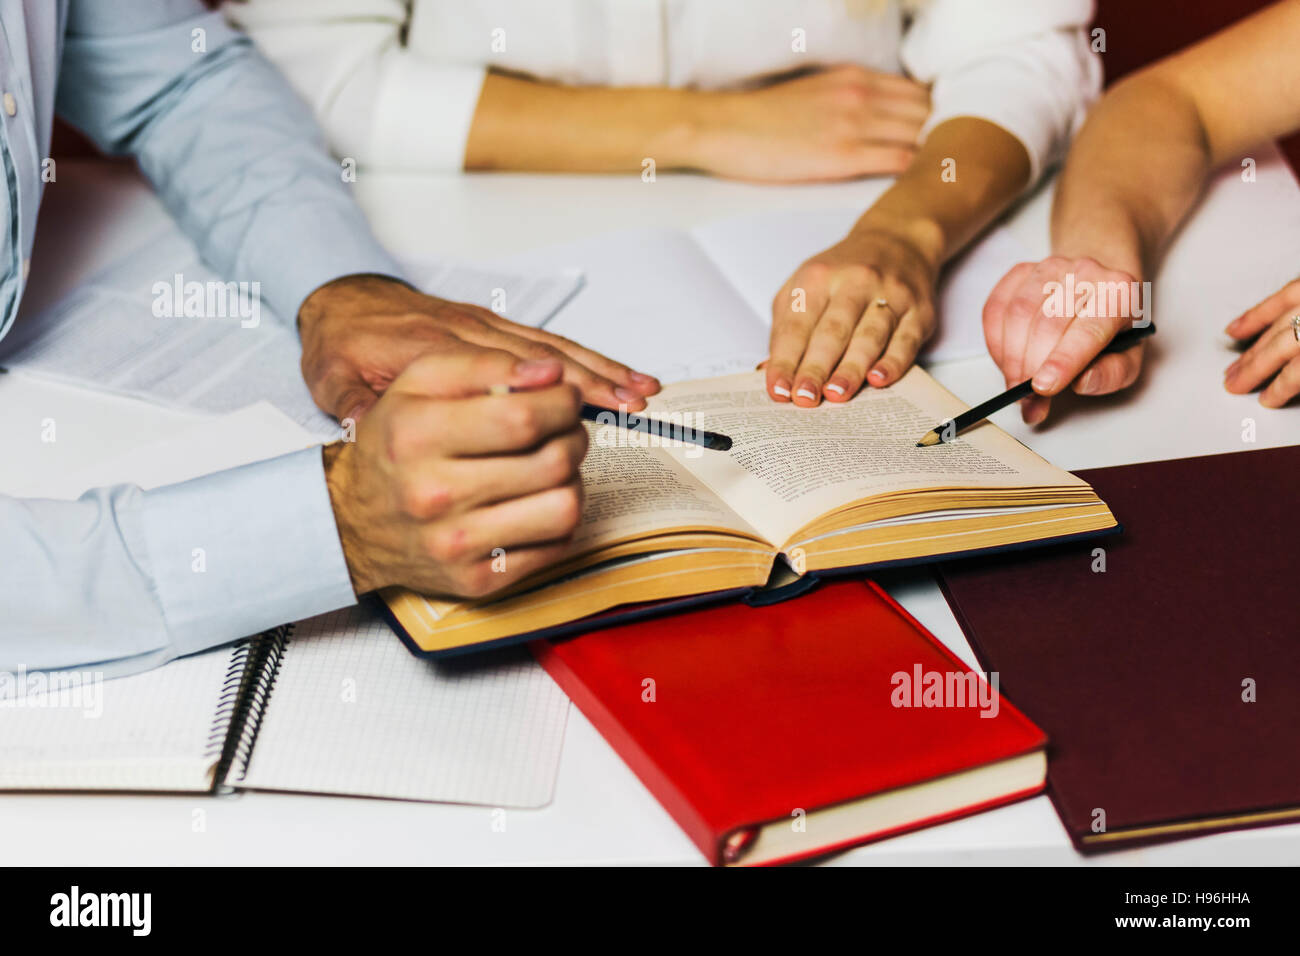 Group of Students Have a Friendly Study Discussion Stock Photo